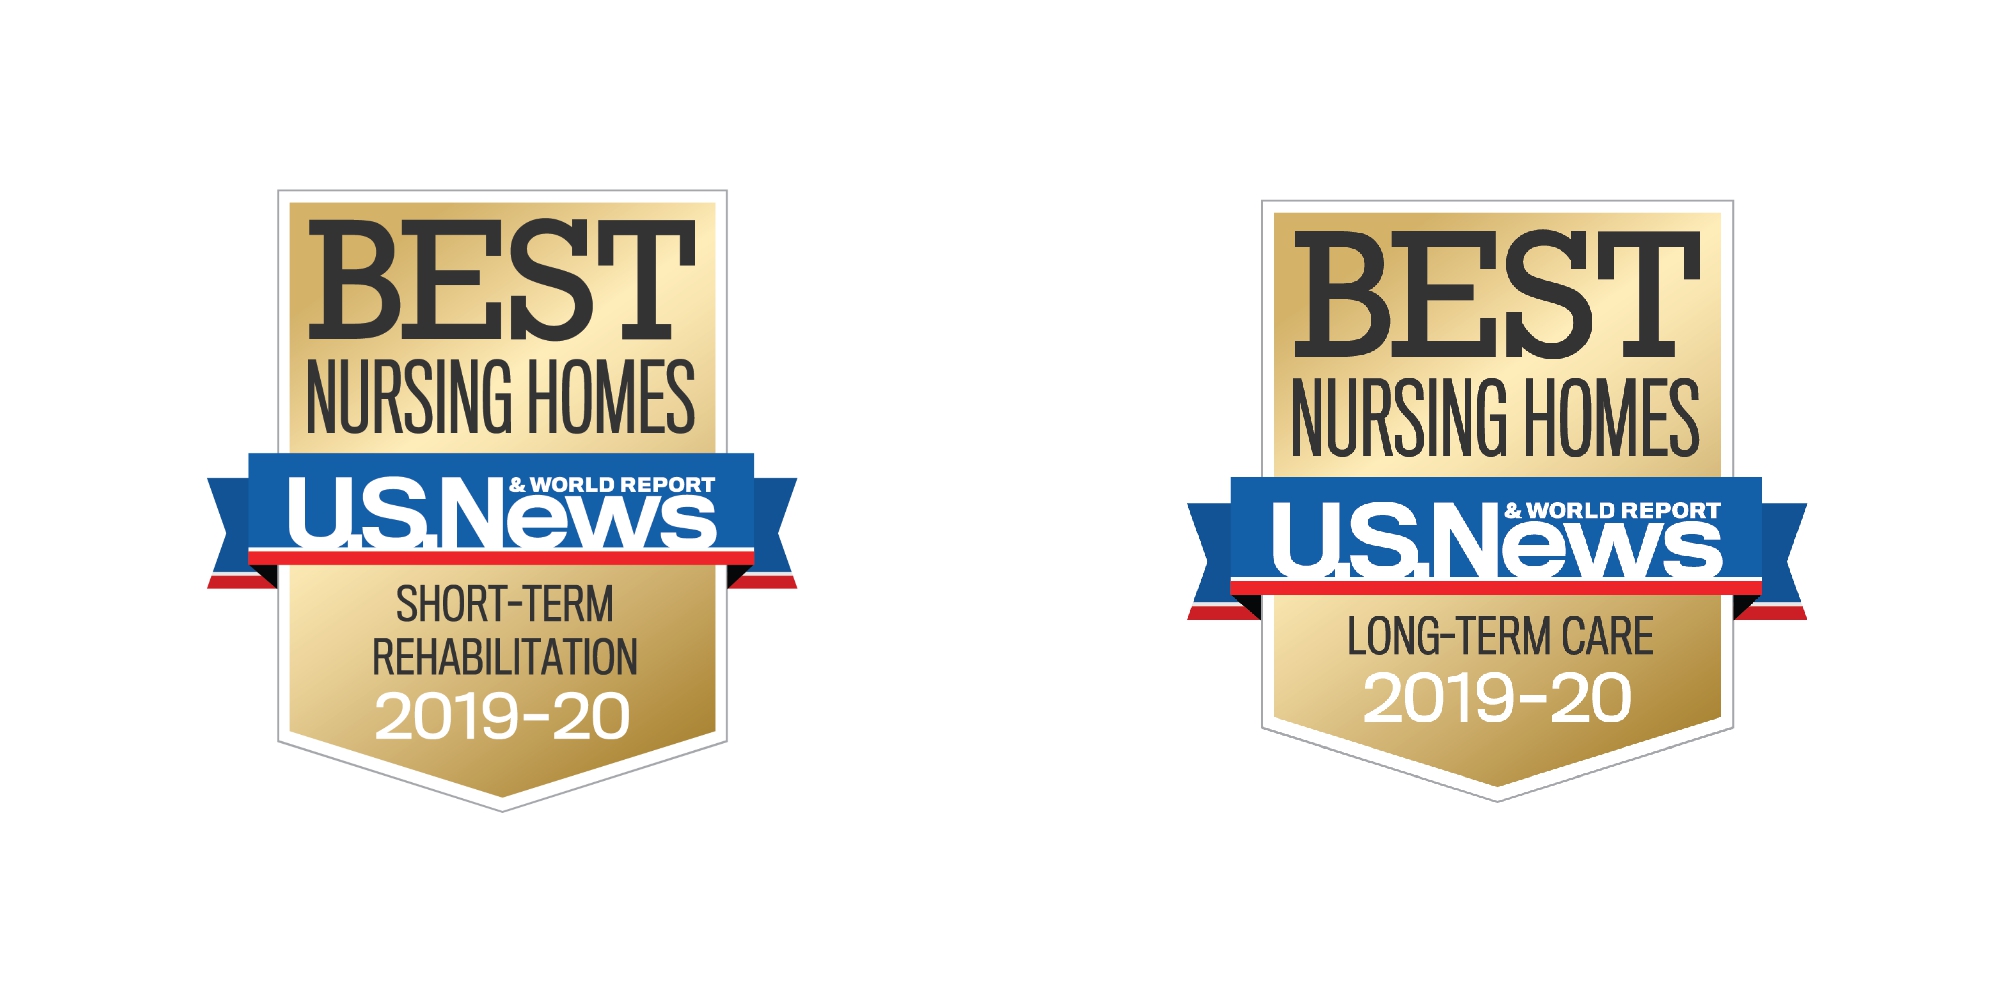 Eastcastle Place’s Bradford Terrace Health and Rehabilitation Center Named Among the Best